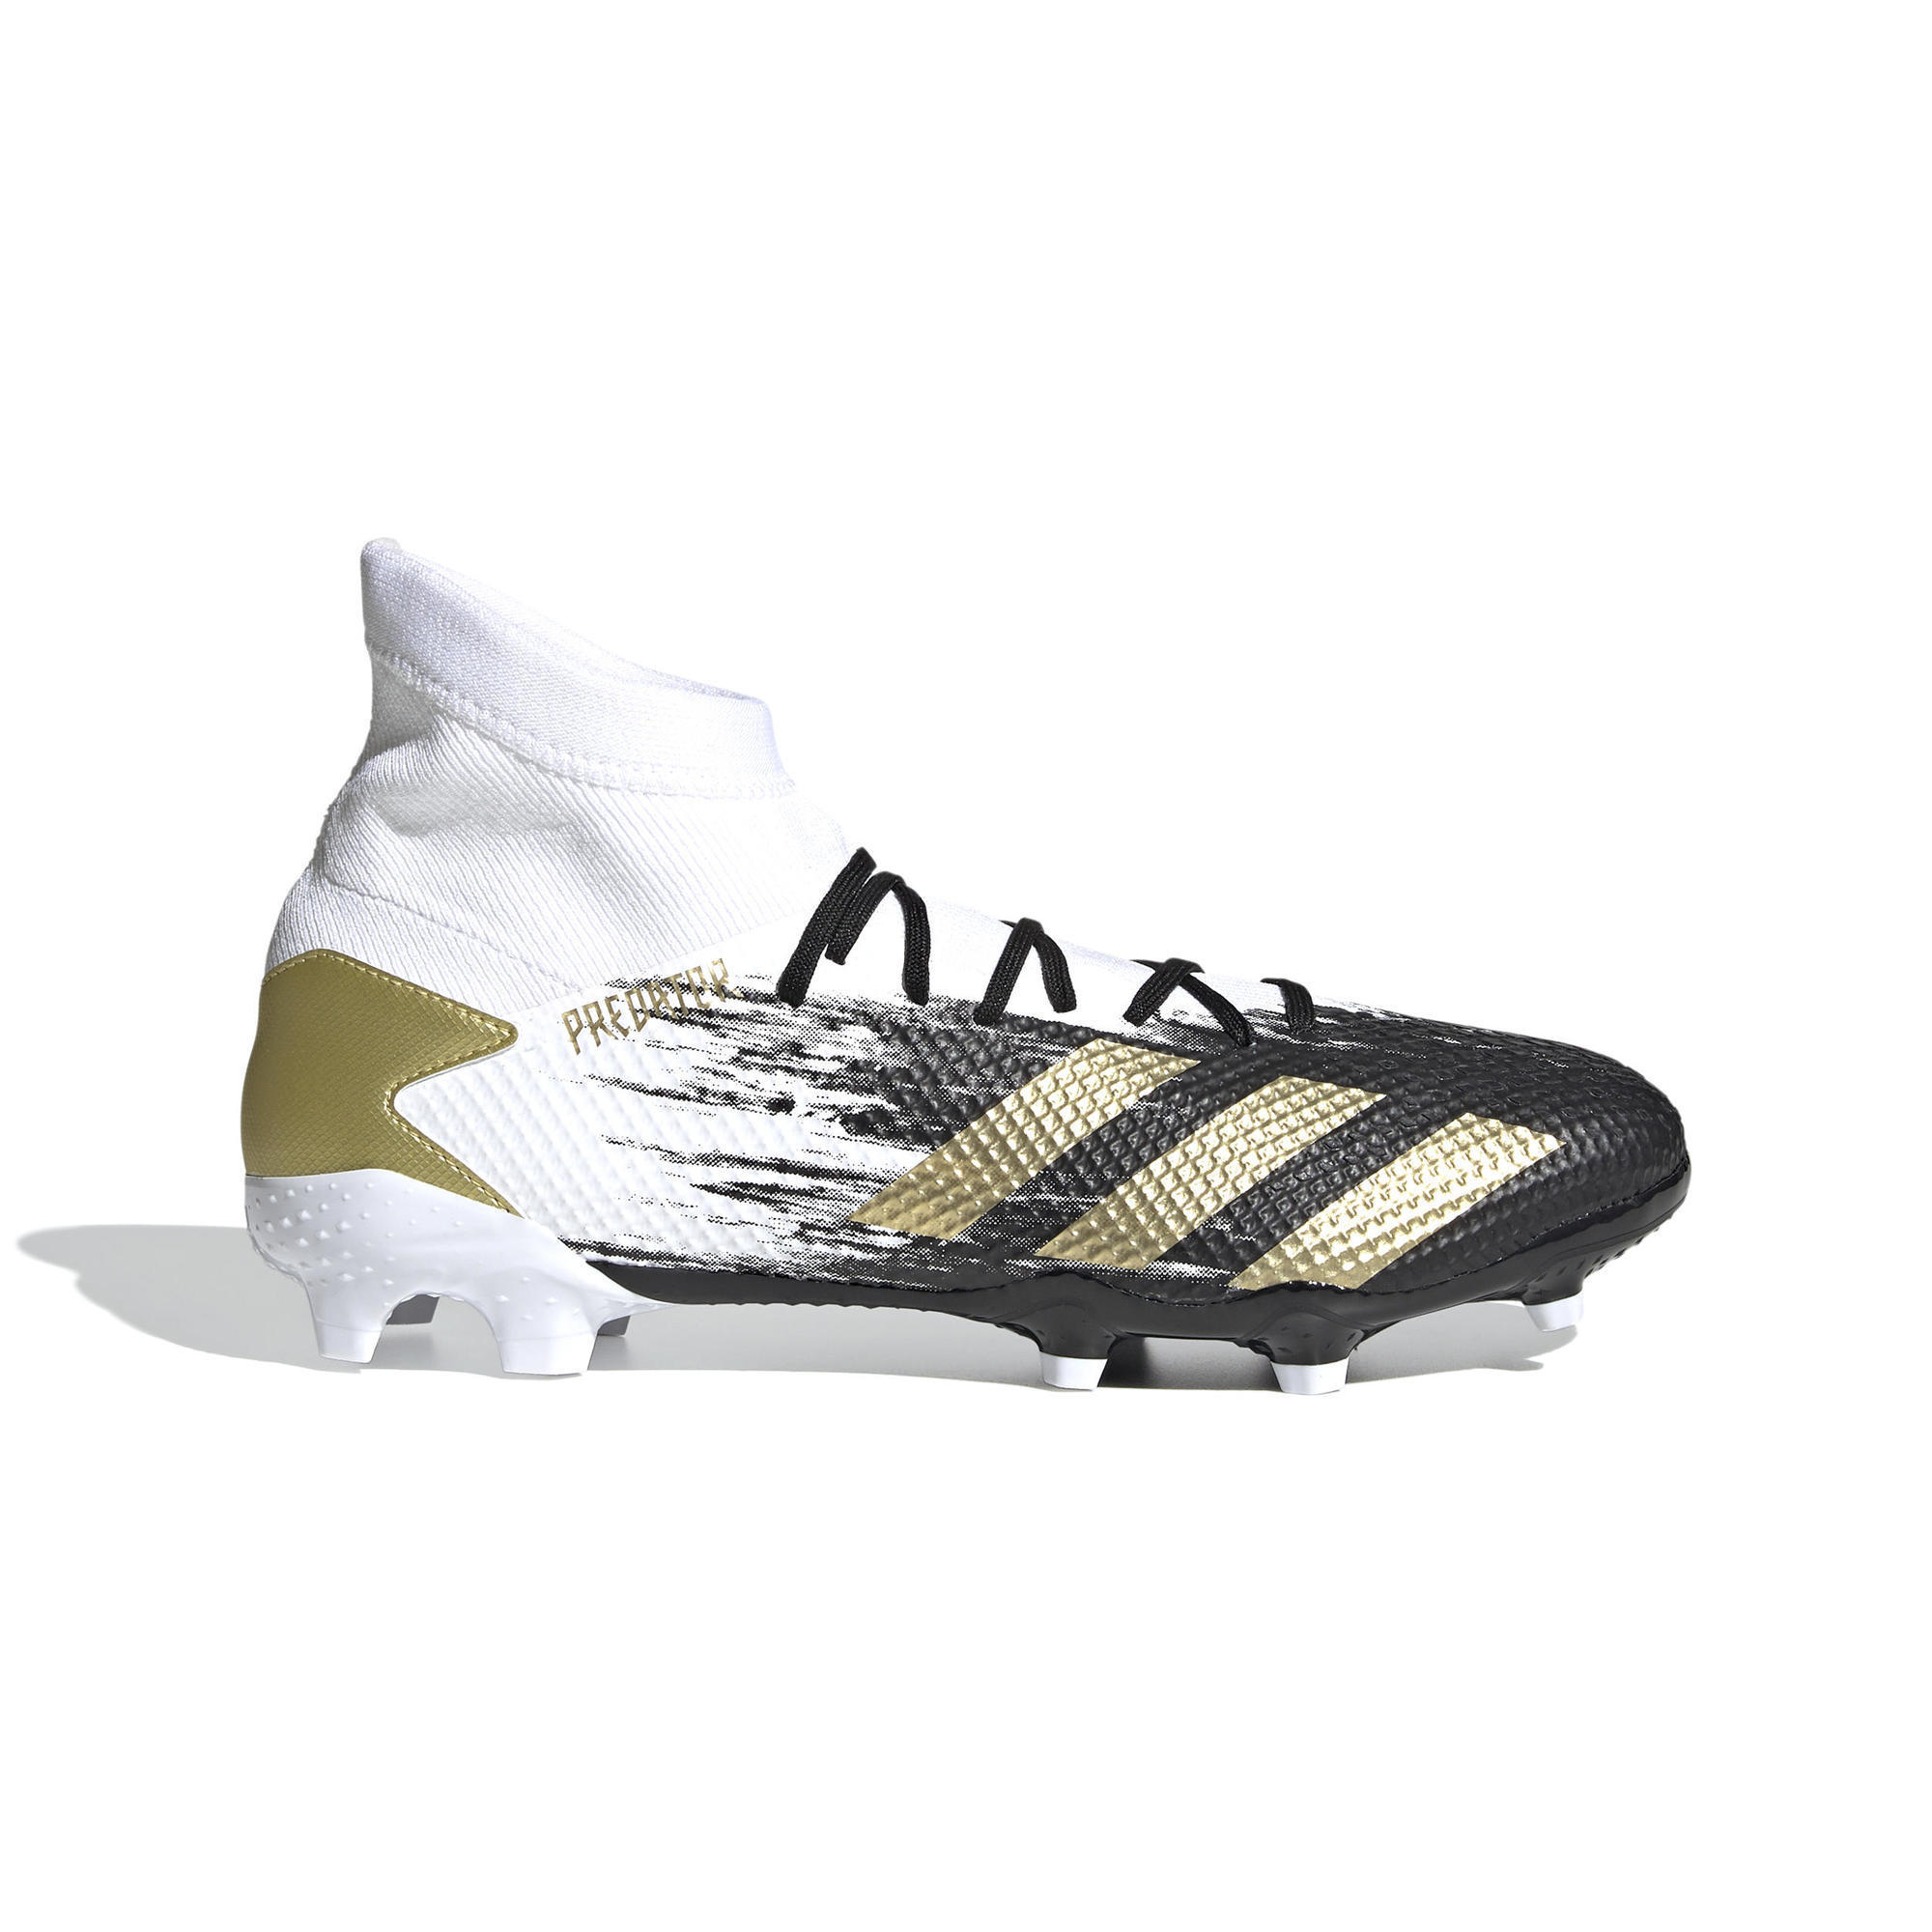 Adult Firm Ground Football Boots 